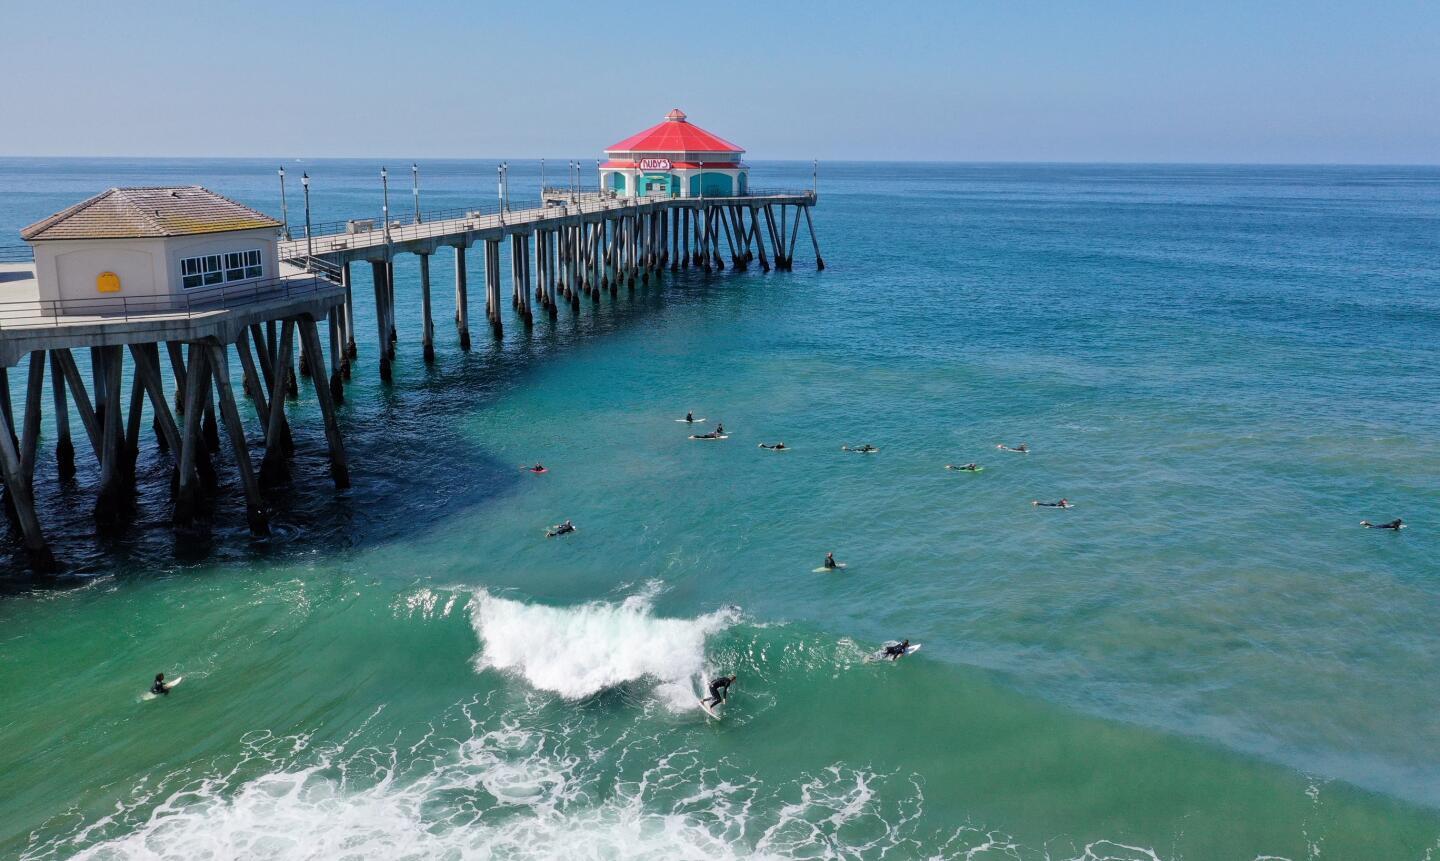 Surfers ride the waves on the north side of the Huntington Beach Pier